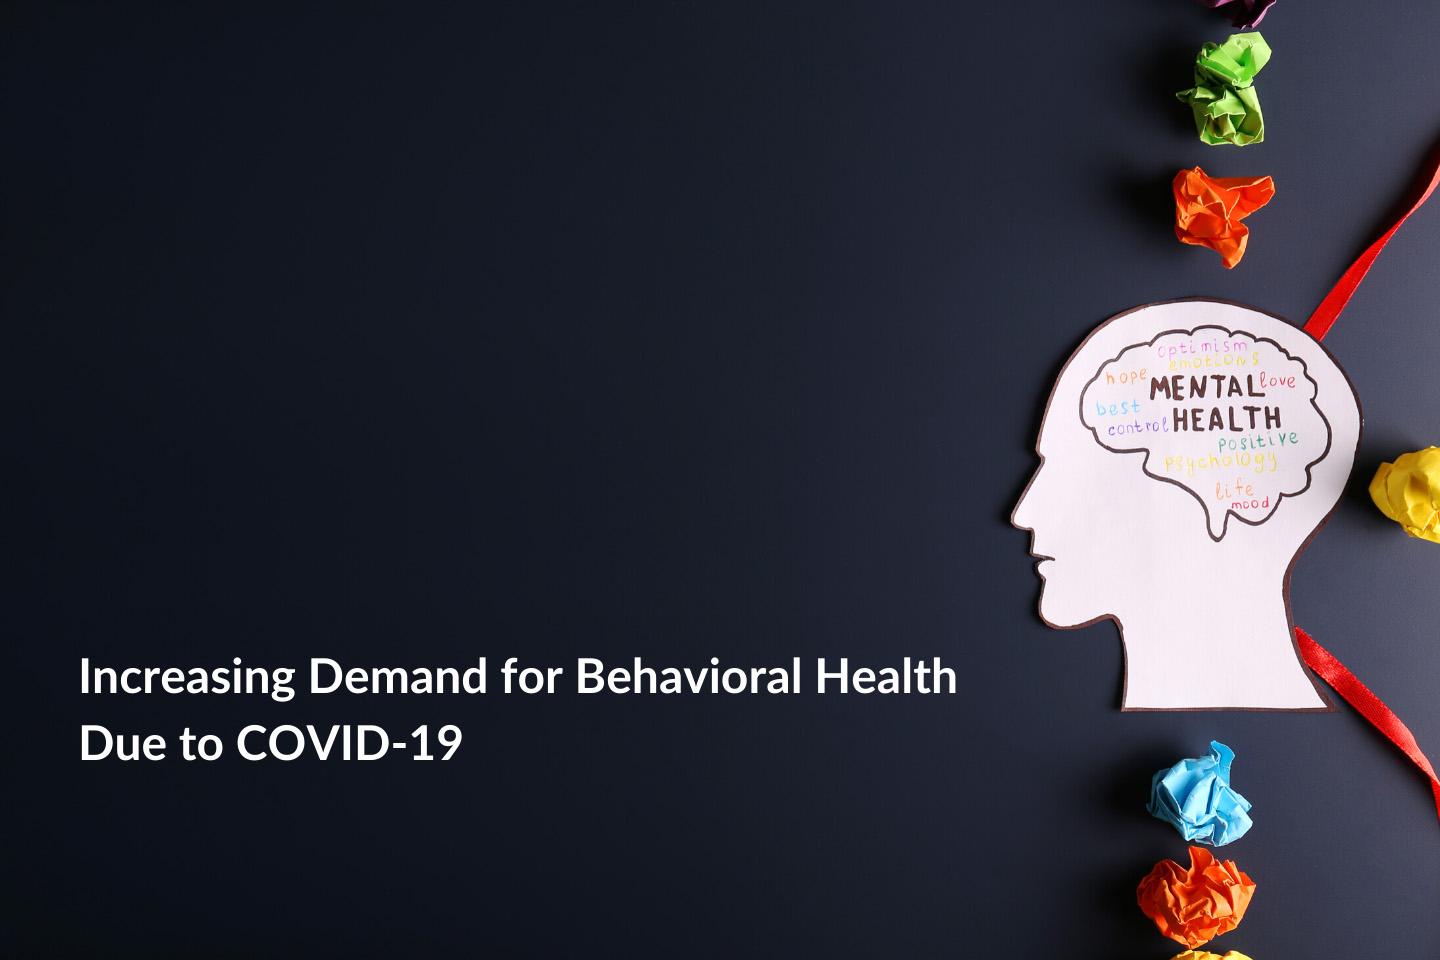 Increasing Demand for Behavioral Health Due to COVID-19